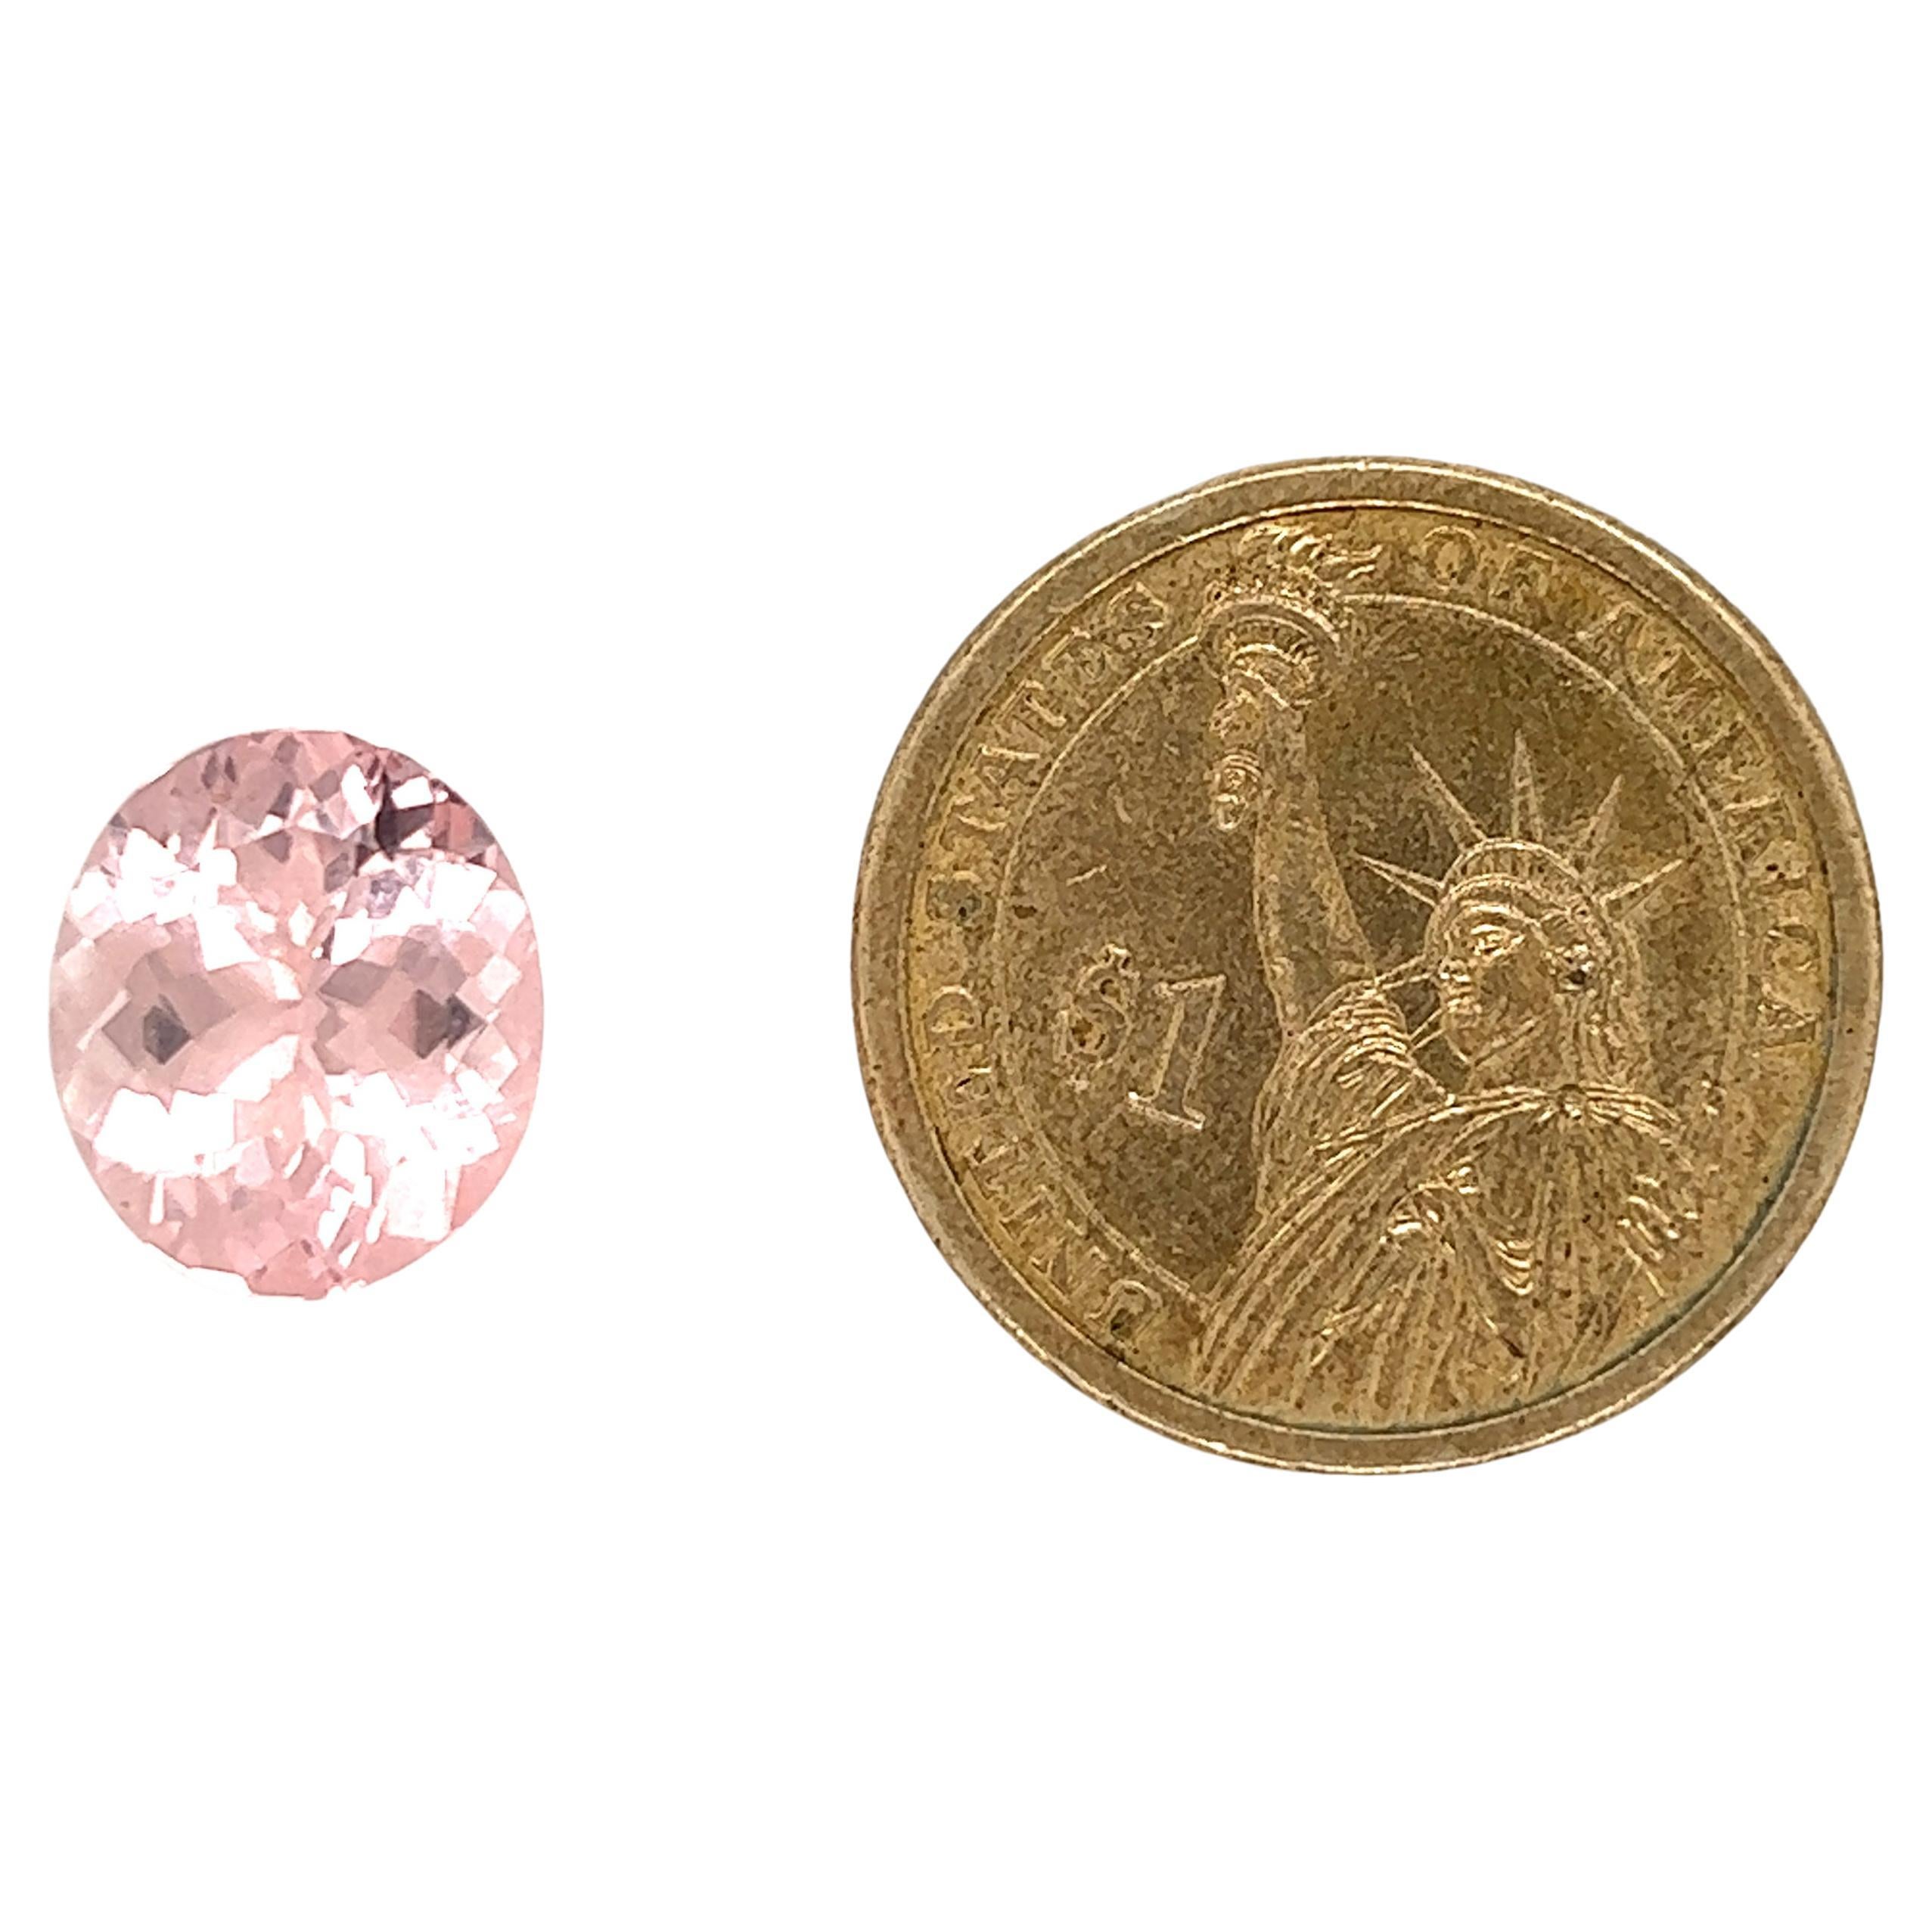 SKU - 50015
Stone : Natural Pink Morganite
Shape : Oval
Clarity -  Eye clean
Grade -  AAA
Weight - 7.02 Cts
Length * Width * Height - 14.5*12.4*7.3
Price - $ 2500

Morganite is a gemstone that brings the prism of love in all its incarnations.